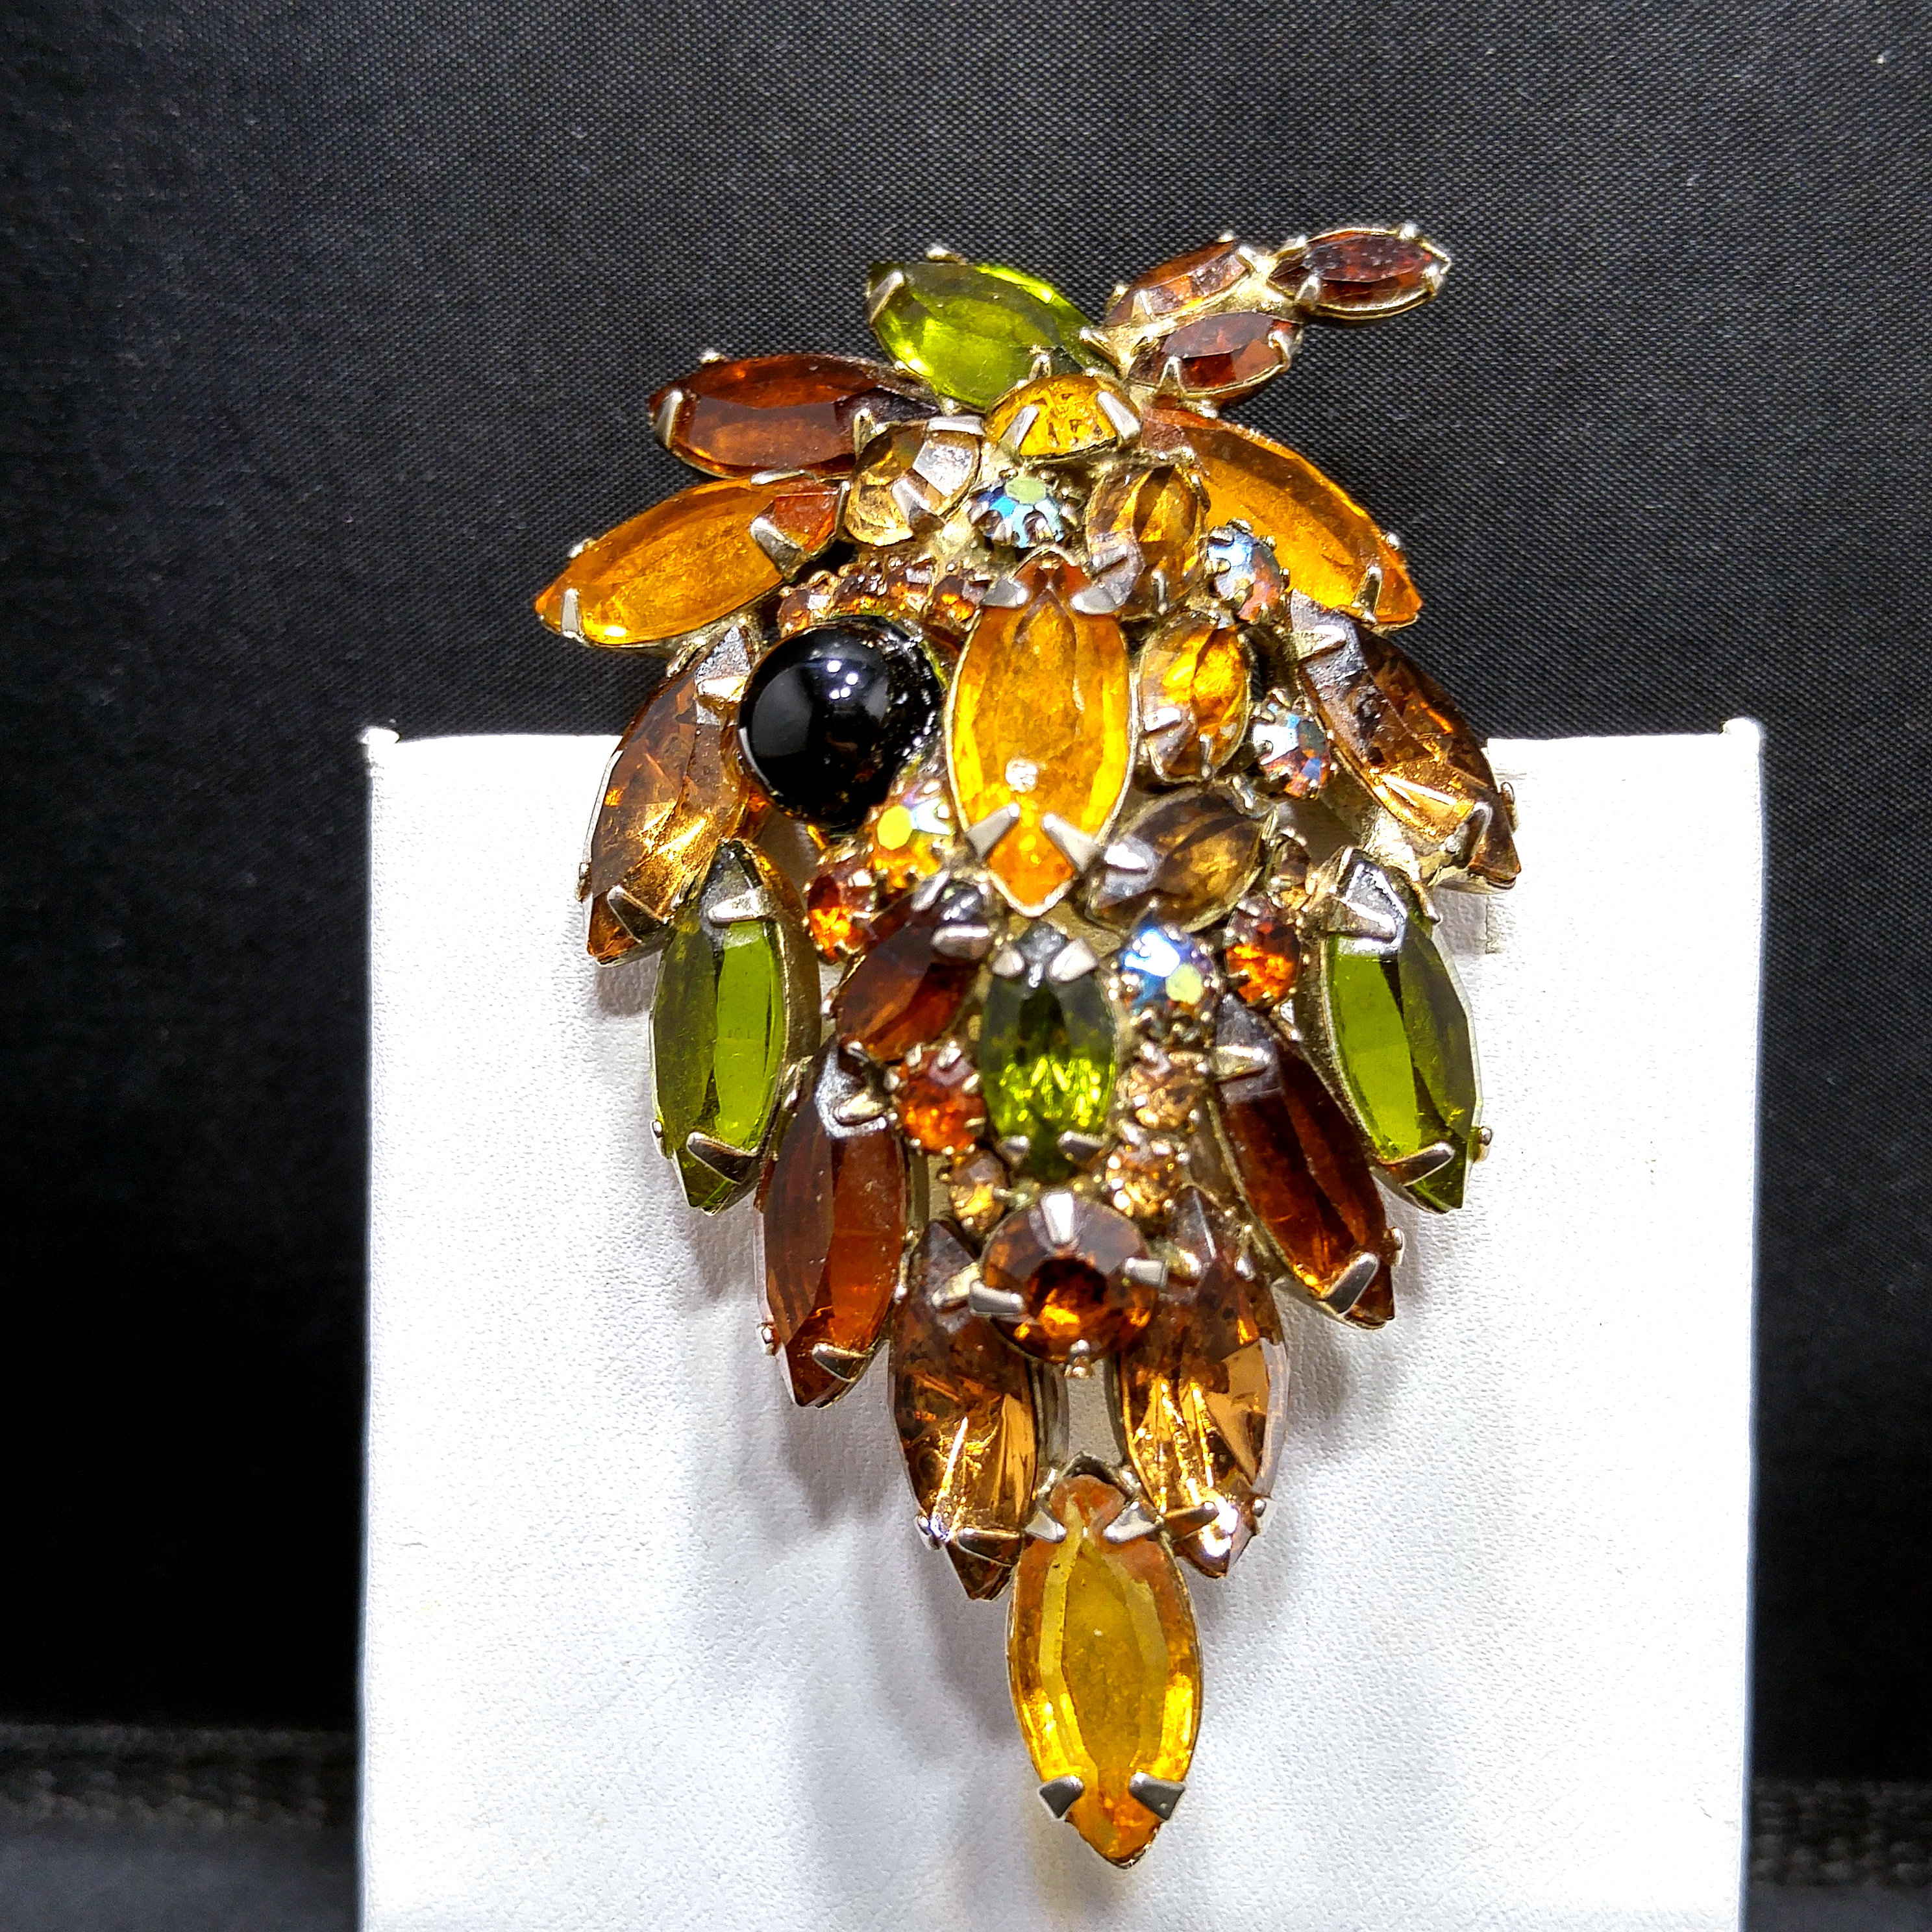 Juliana Brooch with An Opalescent Glass Oval Cabochon, Dark Gray Rhinestones That Are The Color of Hematite, Yellow and Caramel Colored Rhinestones